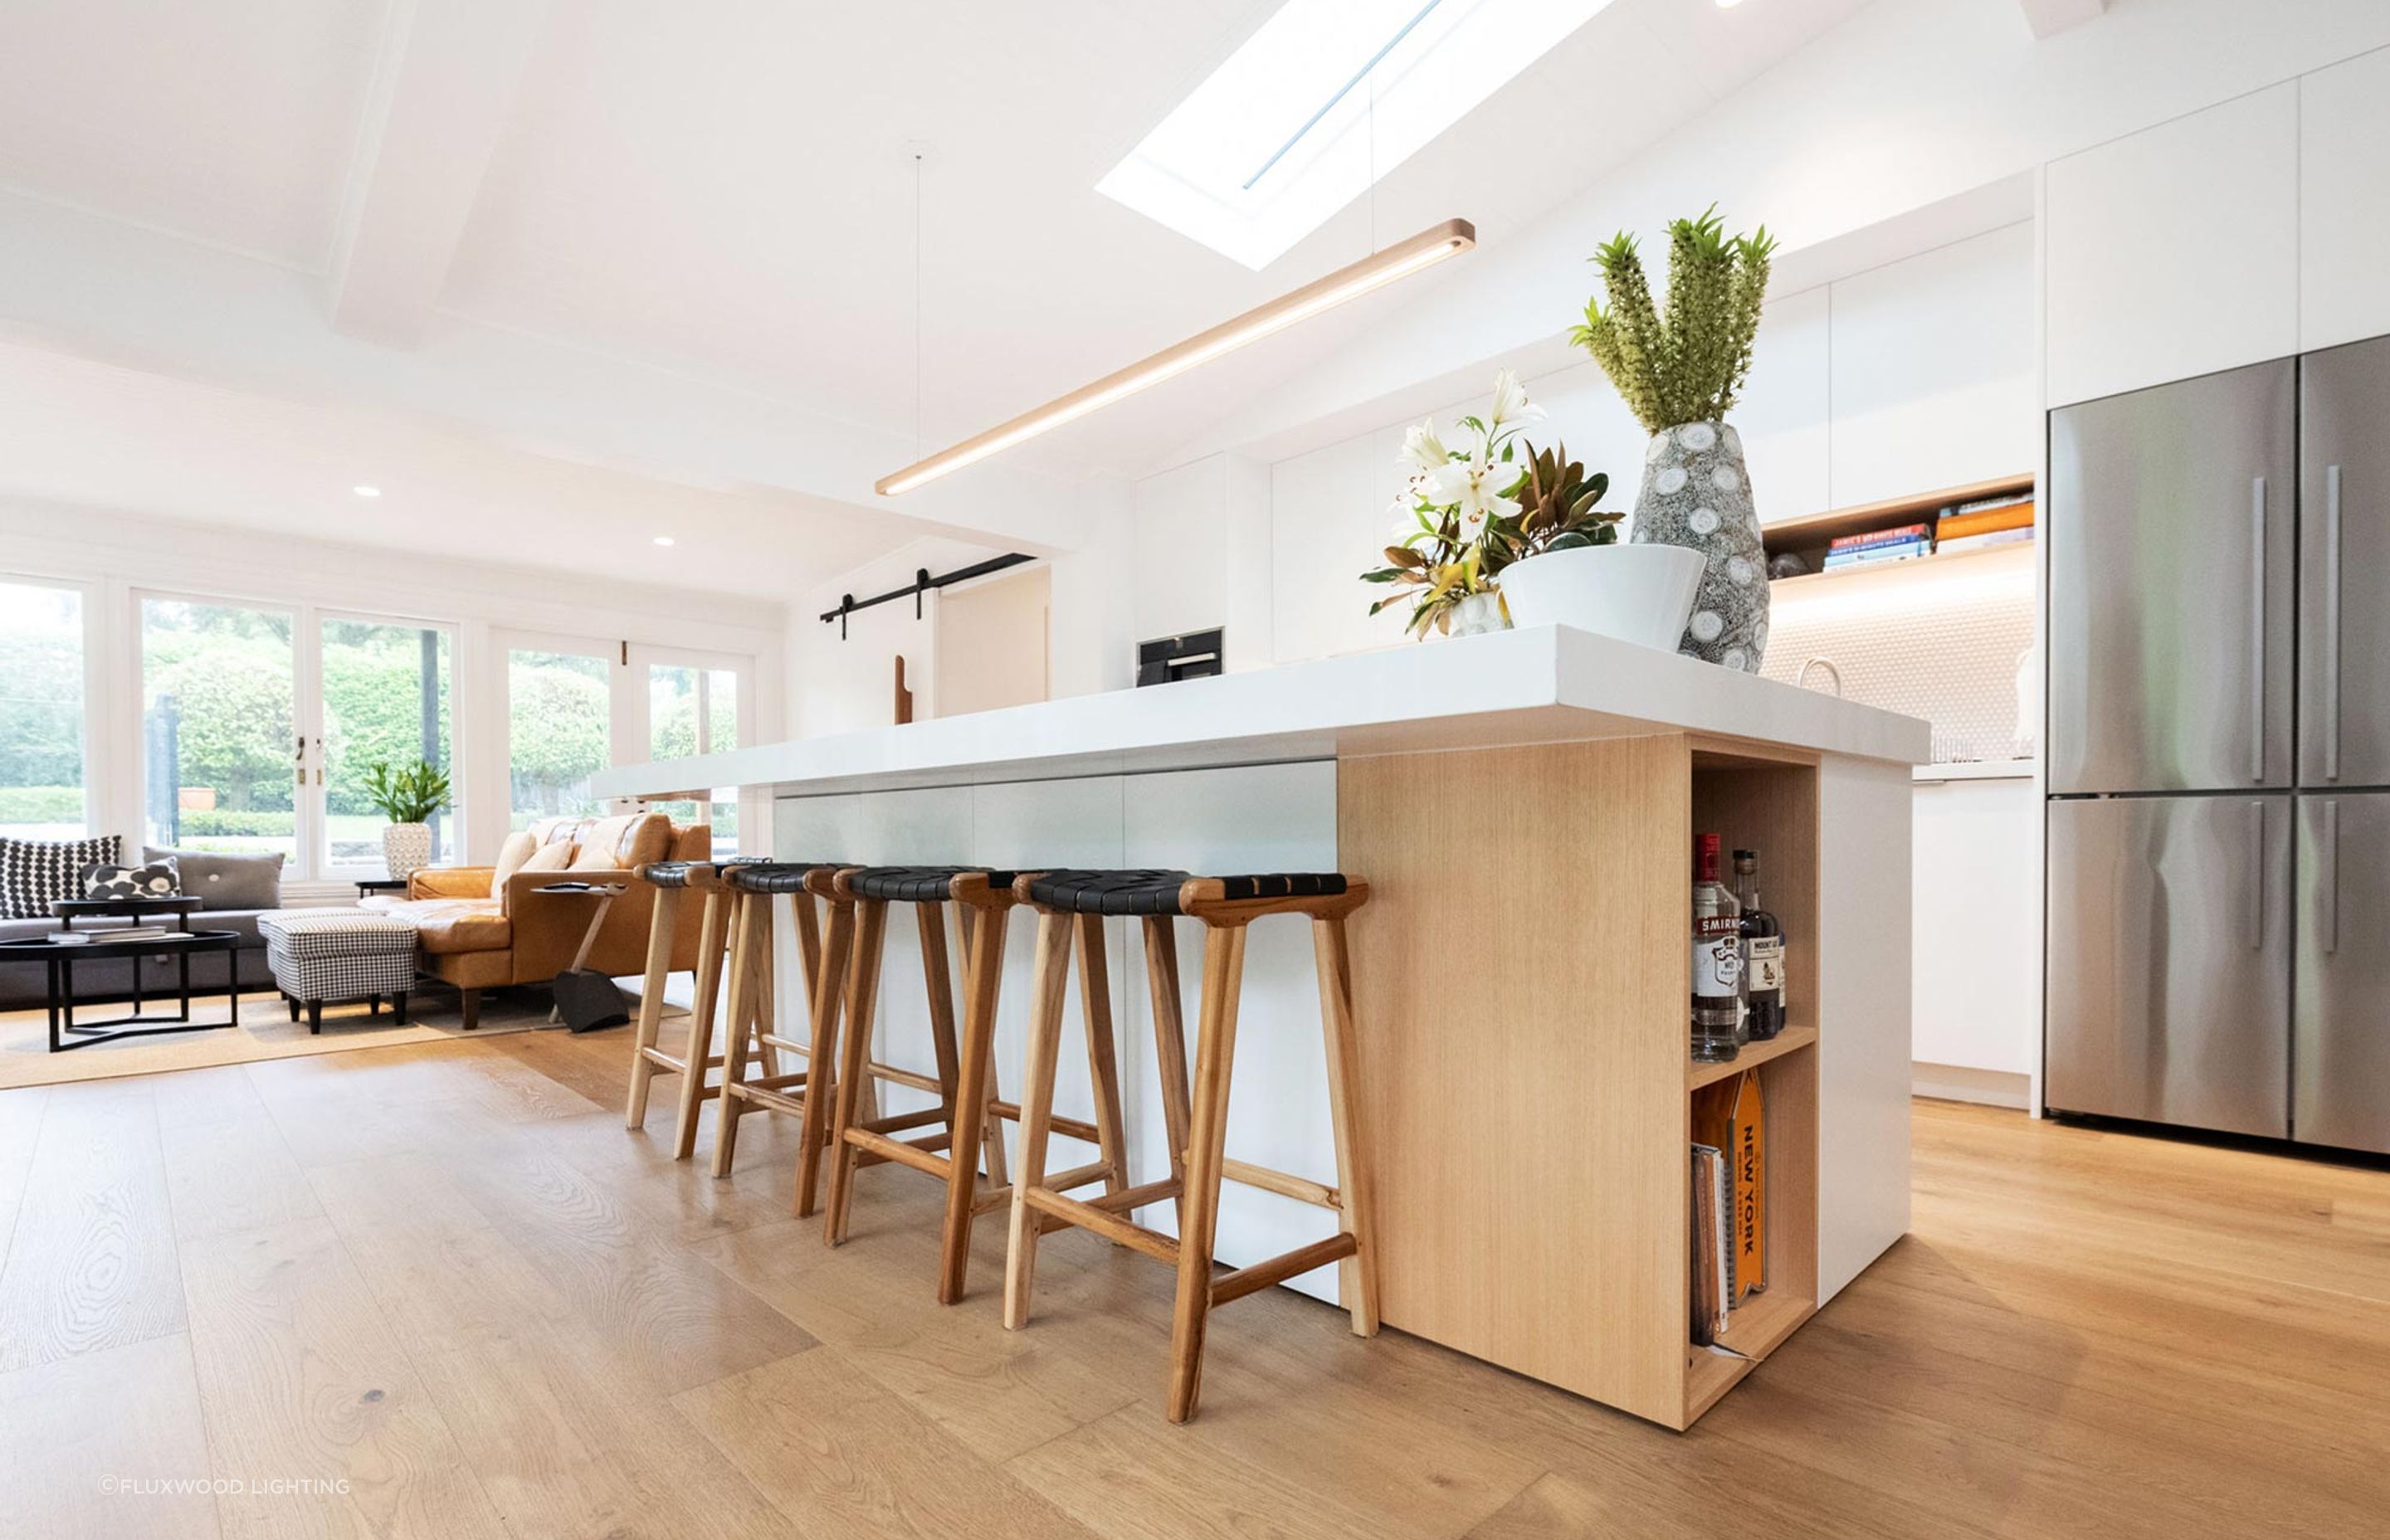 This minimalist LED strip light hangs gracefully over the kitchen island. Featured product: Hollow Pendant